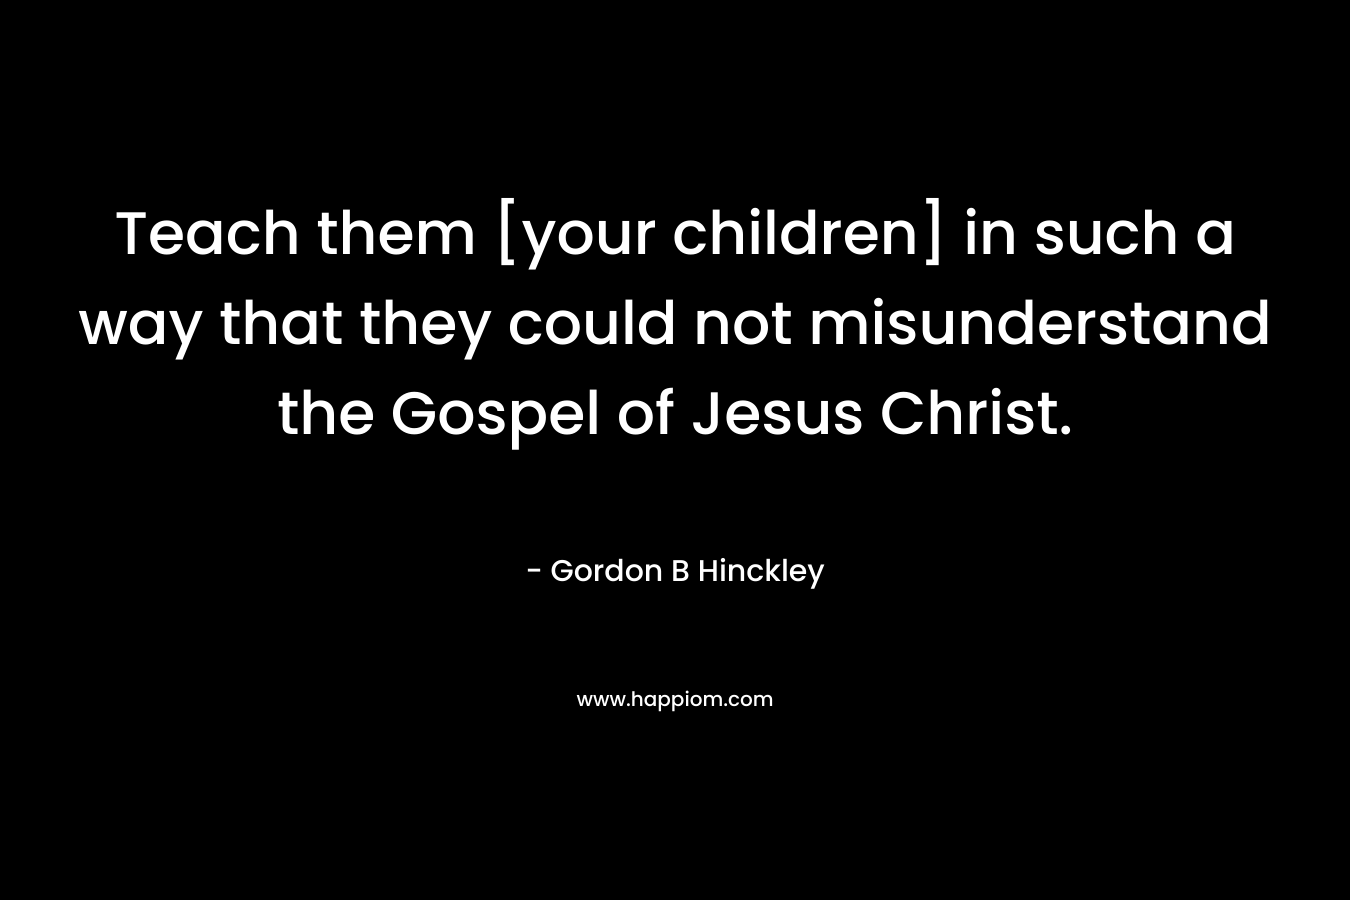 Teach them [your children] in such a way that they could not misunderstand the Gospel of Jesus Christ.